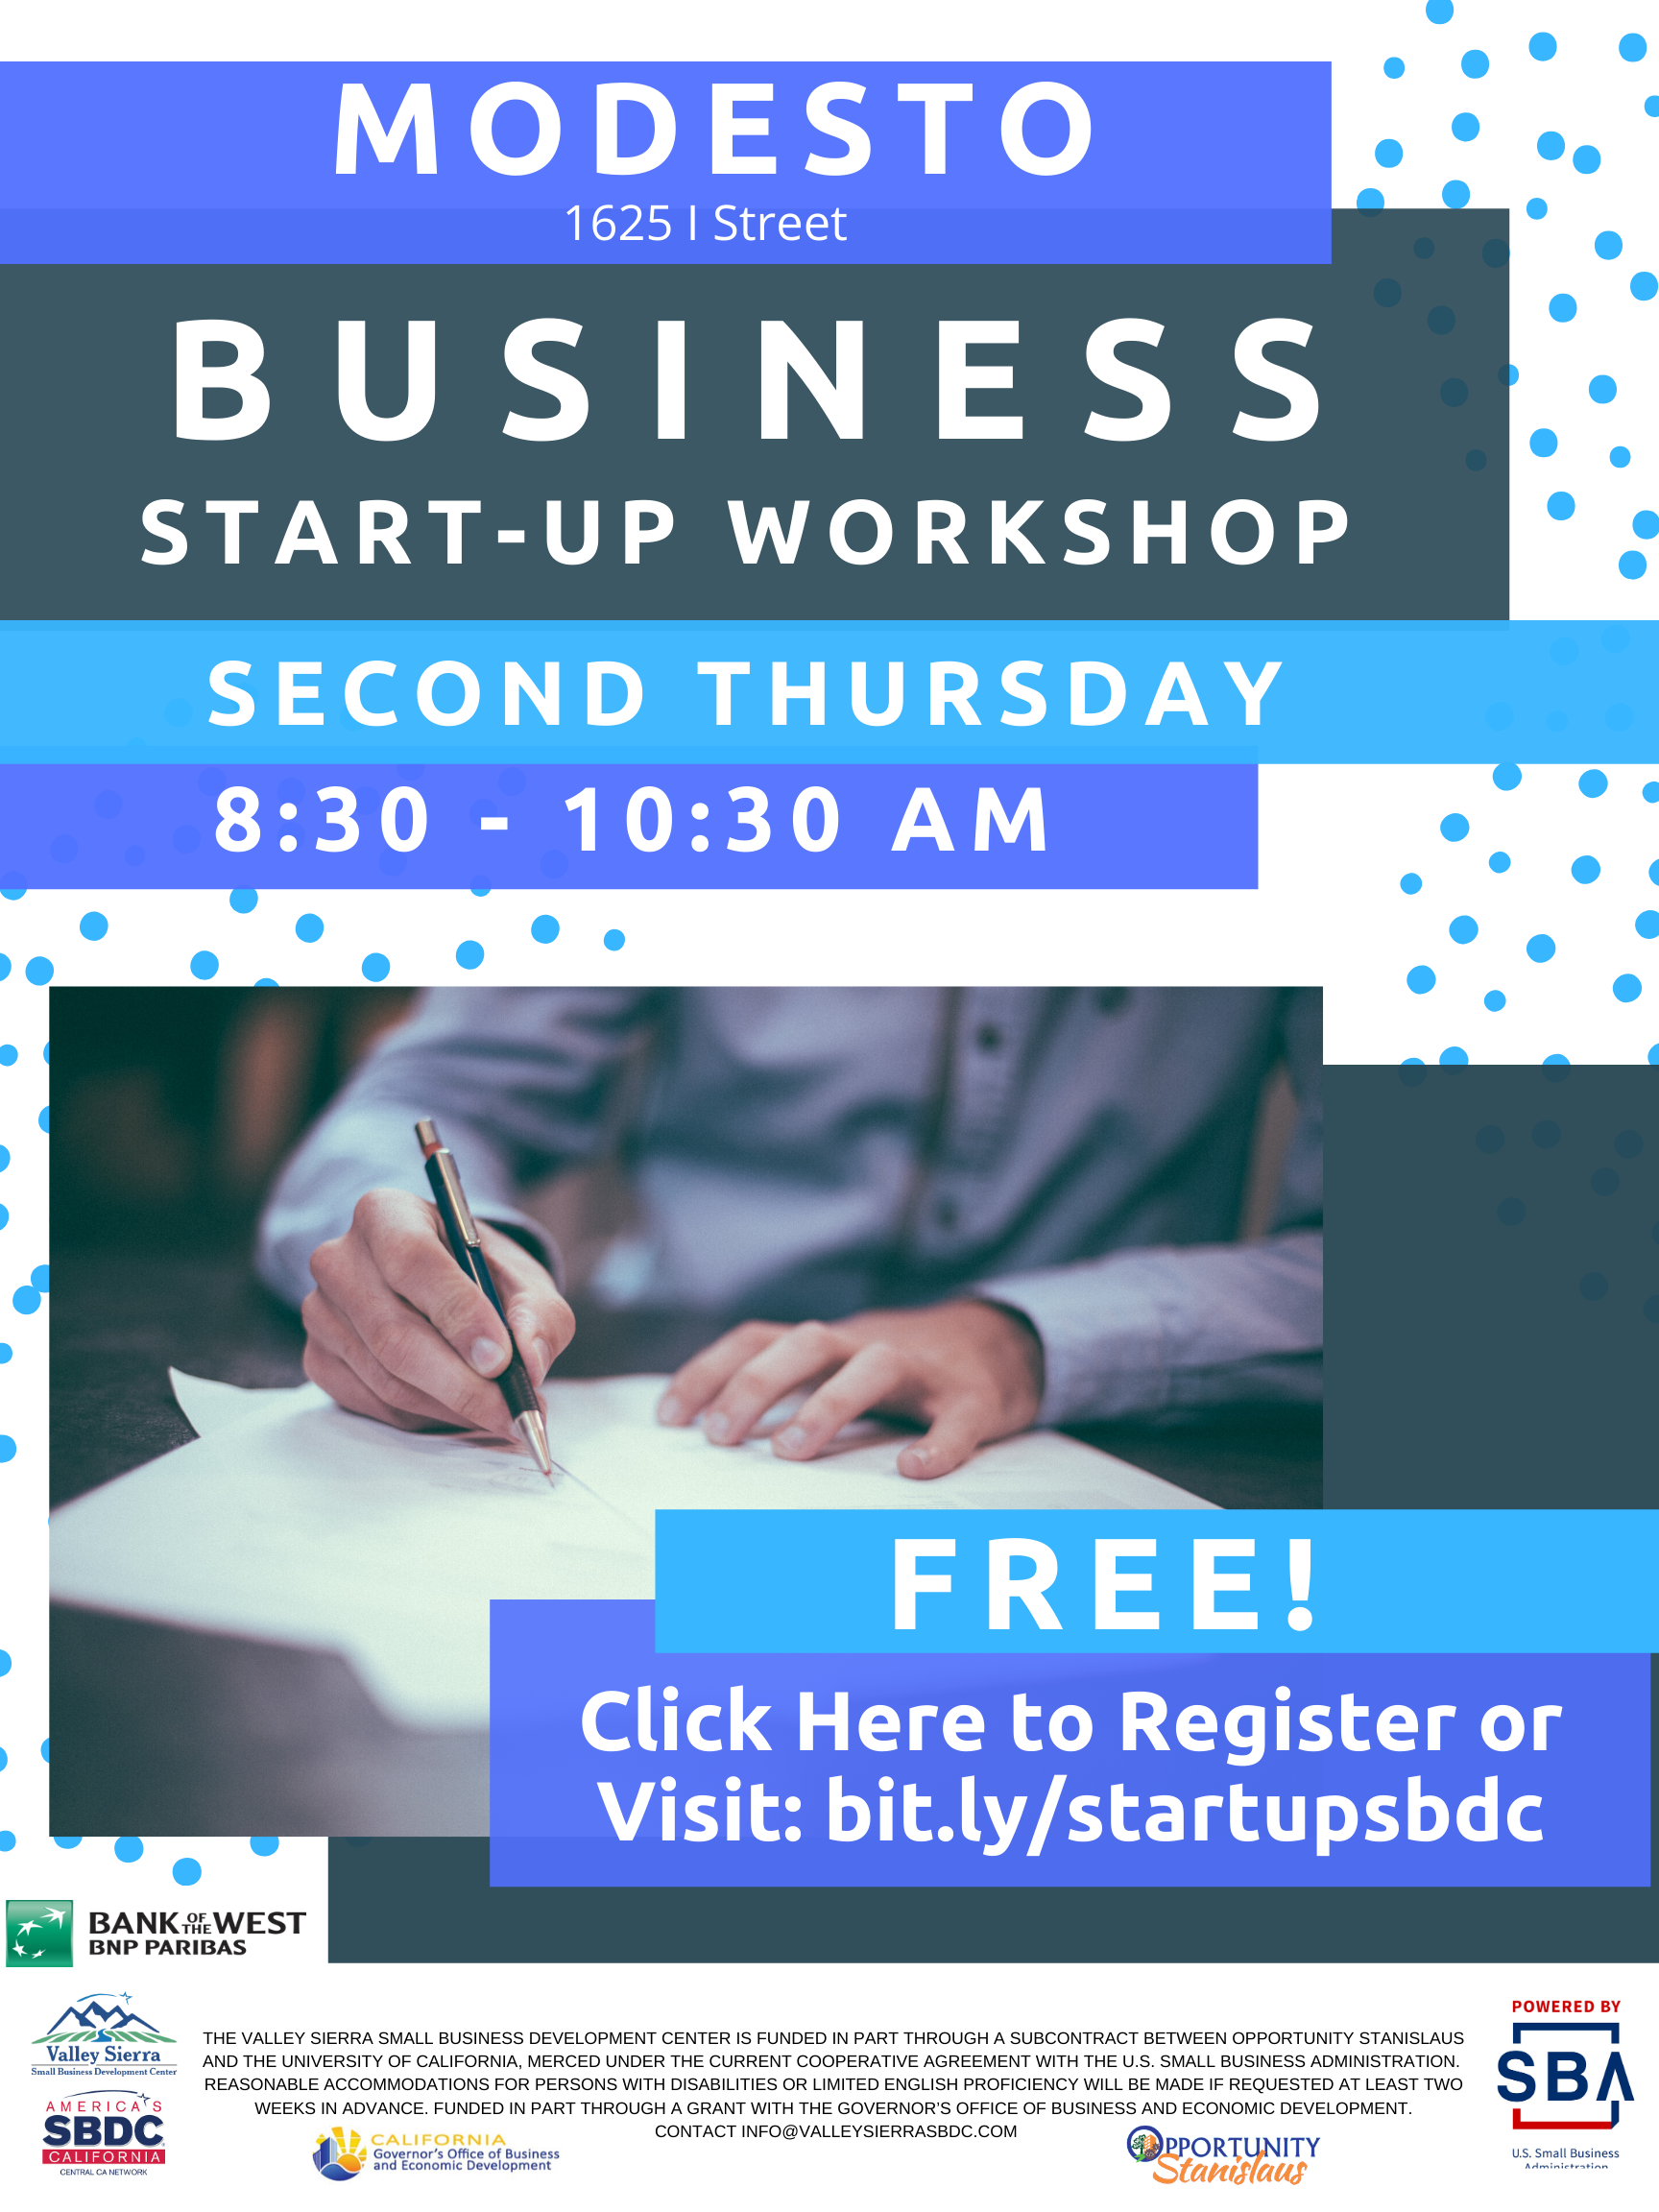 Event Flyer, Modesto Business Start Up, Second Thursday at the Valley Sierra SBDC. FREE.